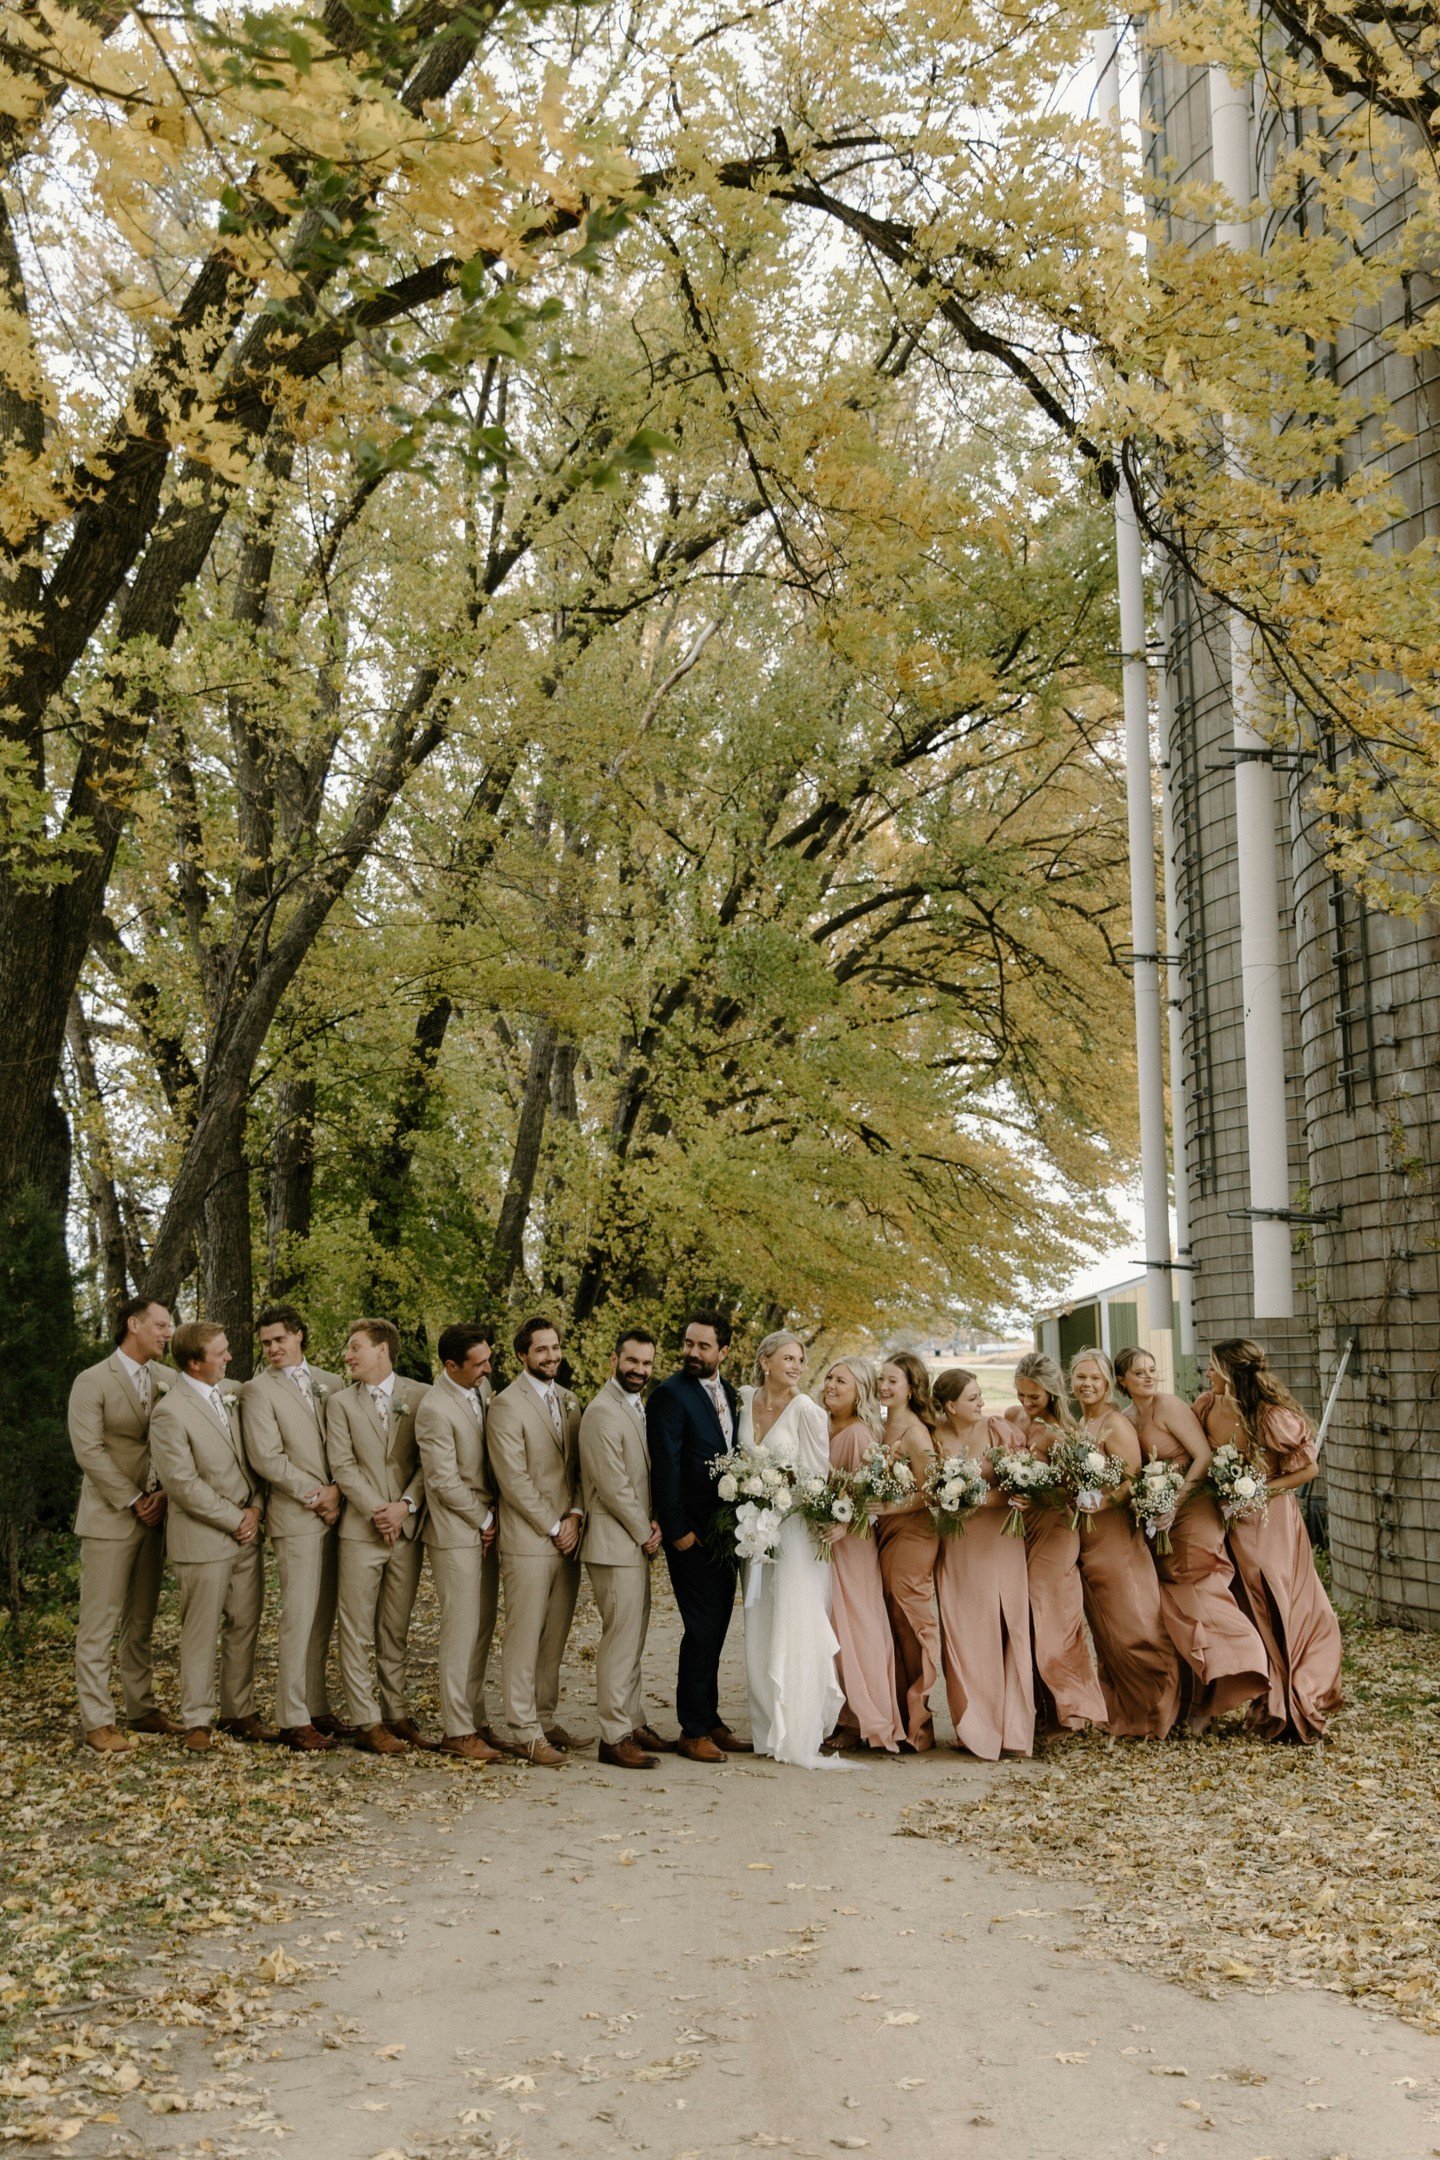 Welcome to what we call, Silo Alley! It's such a beautiful backdrop for your bridal party photos. ✨

We always try to connect with your photographer when they arrive on-site to make sure they know about all the magical photo spots on the farm. 📸

Fo